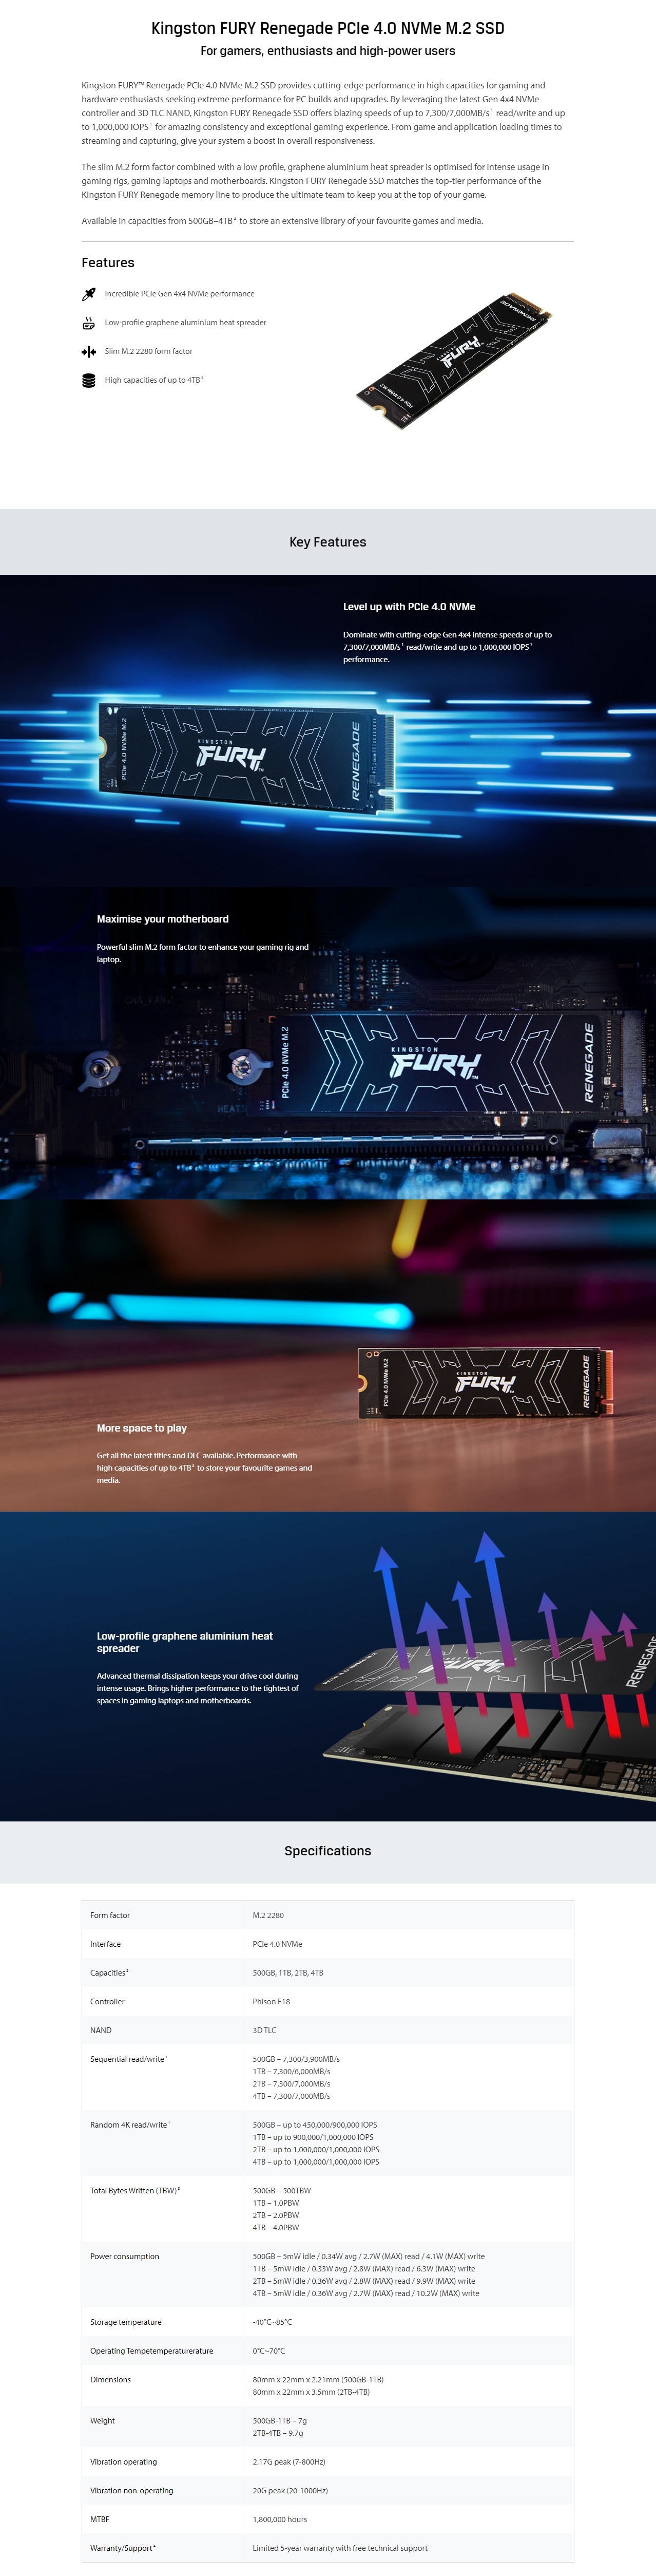 A large marketing image providing additional information about the product Kingston FURY Renegade PCIe Gen4 NVMe M.2 SSD - 500GB - Additional alt info not provided